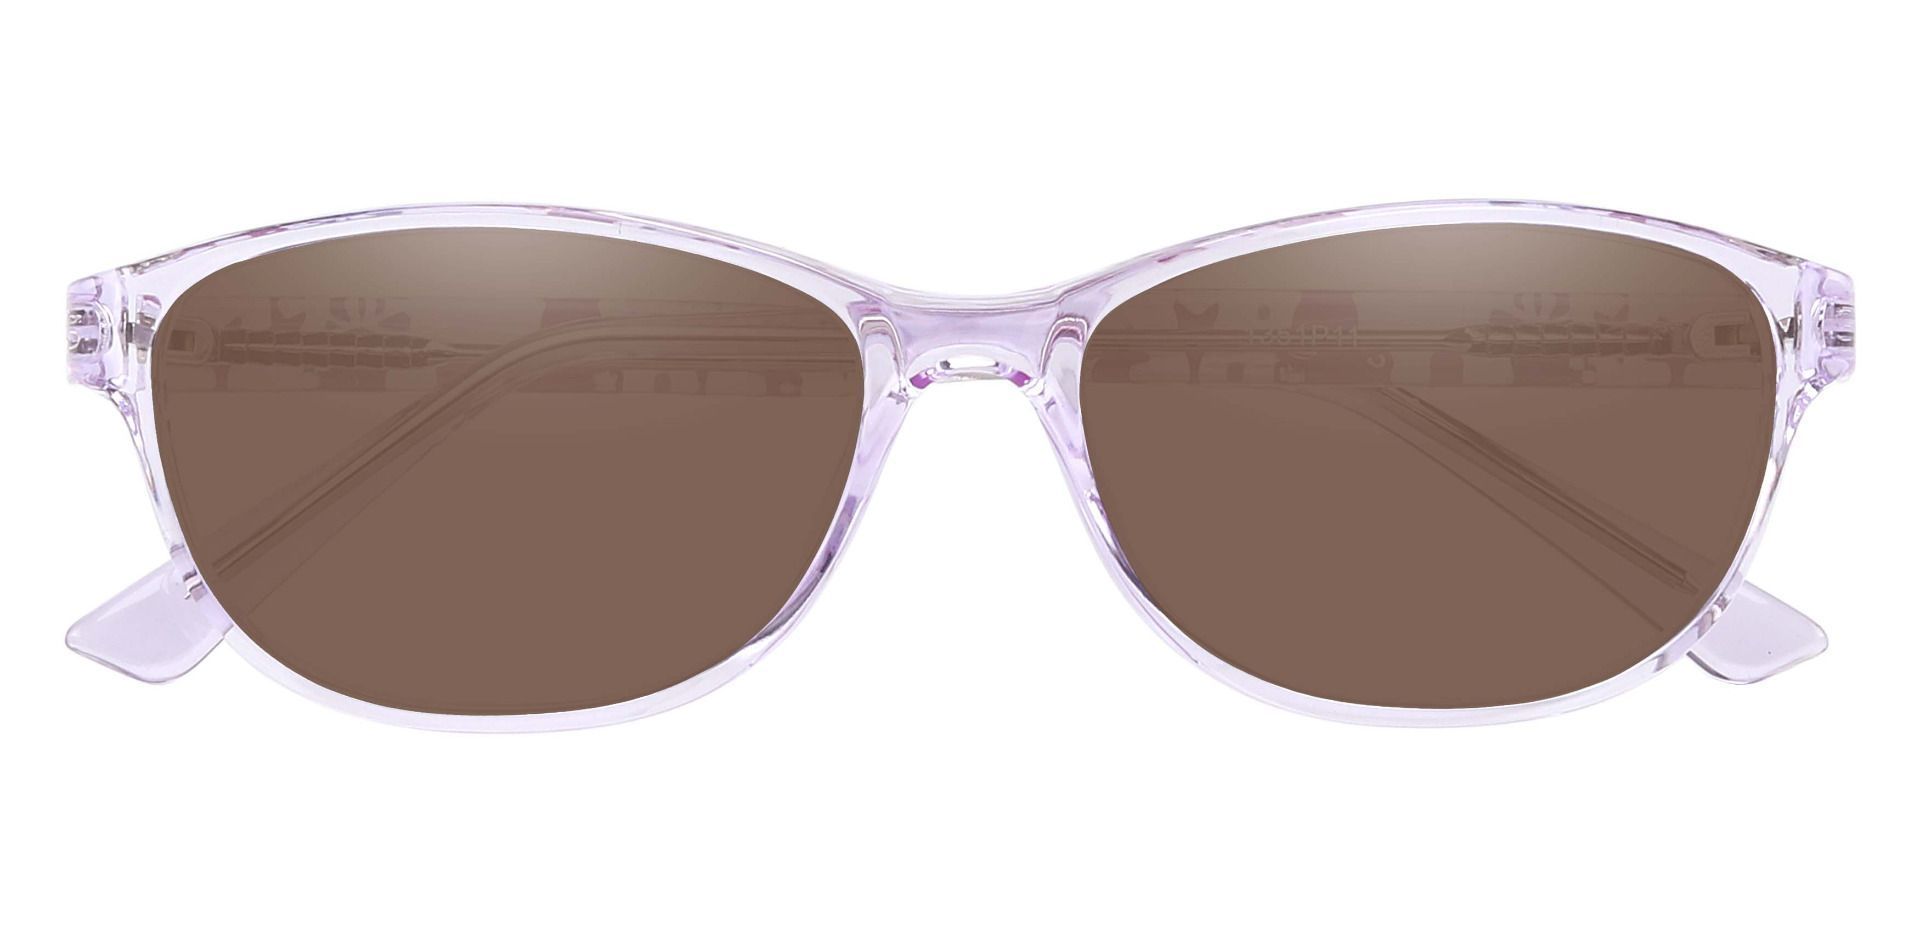 Patsy Oval Progressive Sunglasses - Purple Frame With Brown Lenses